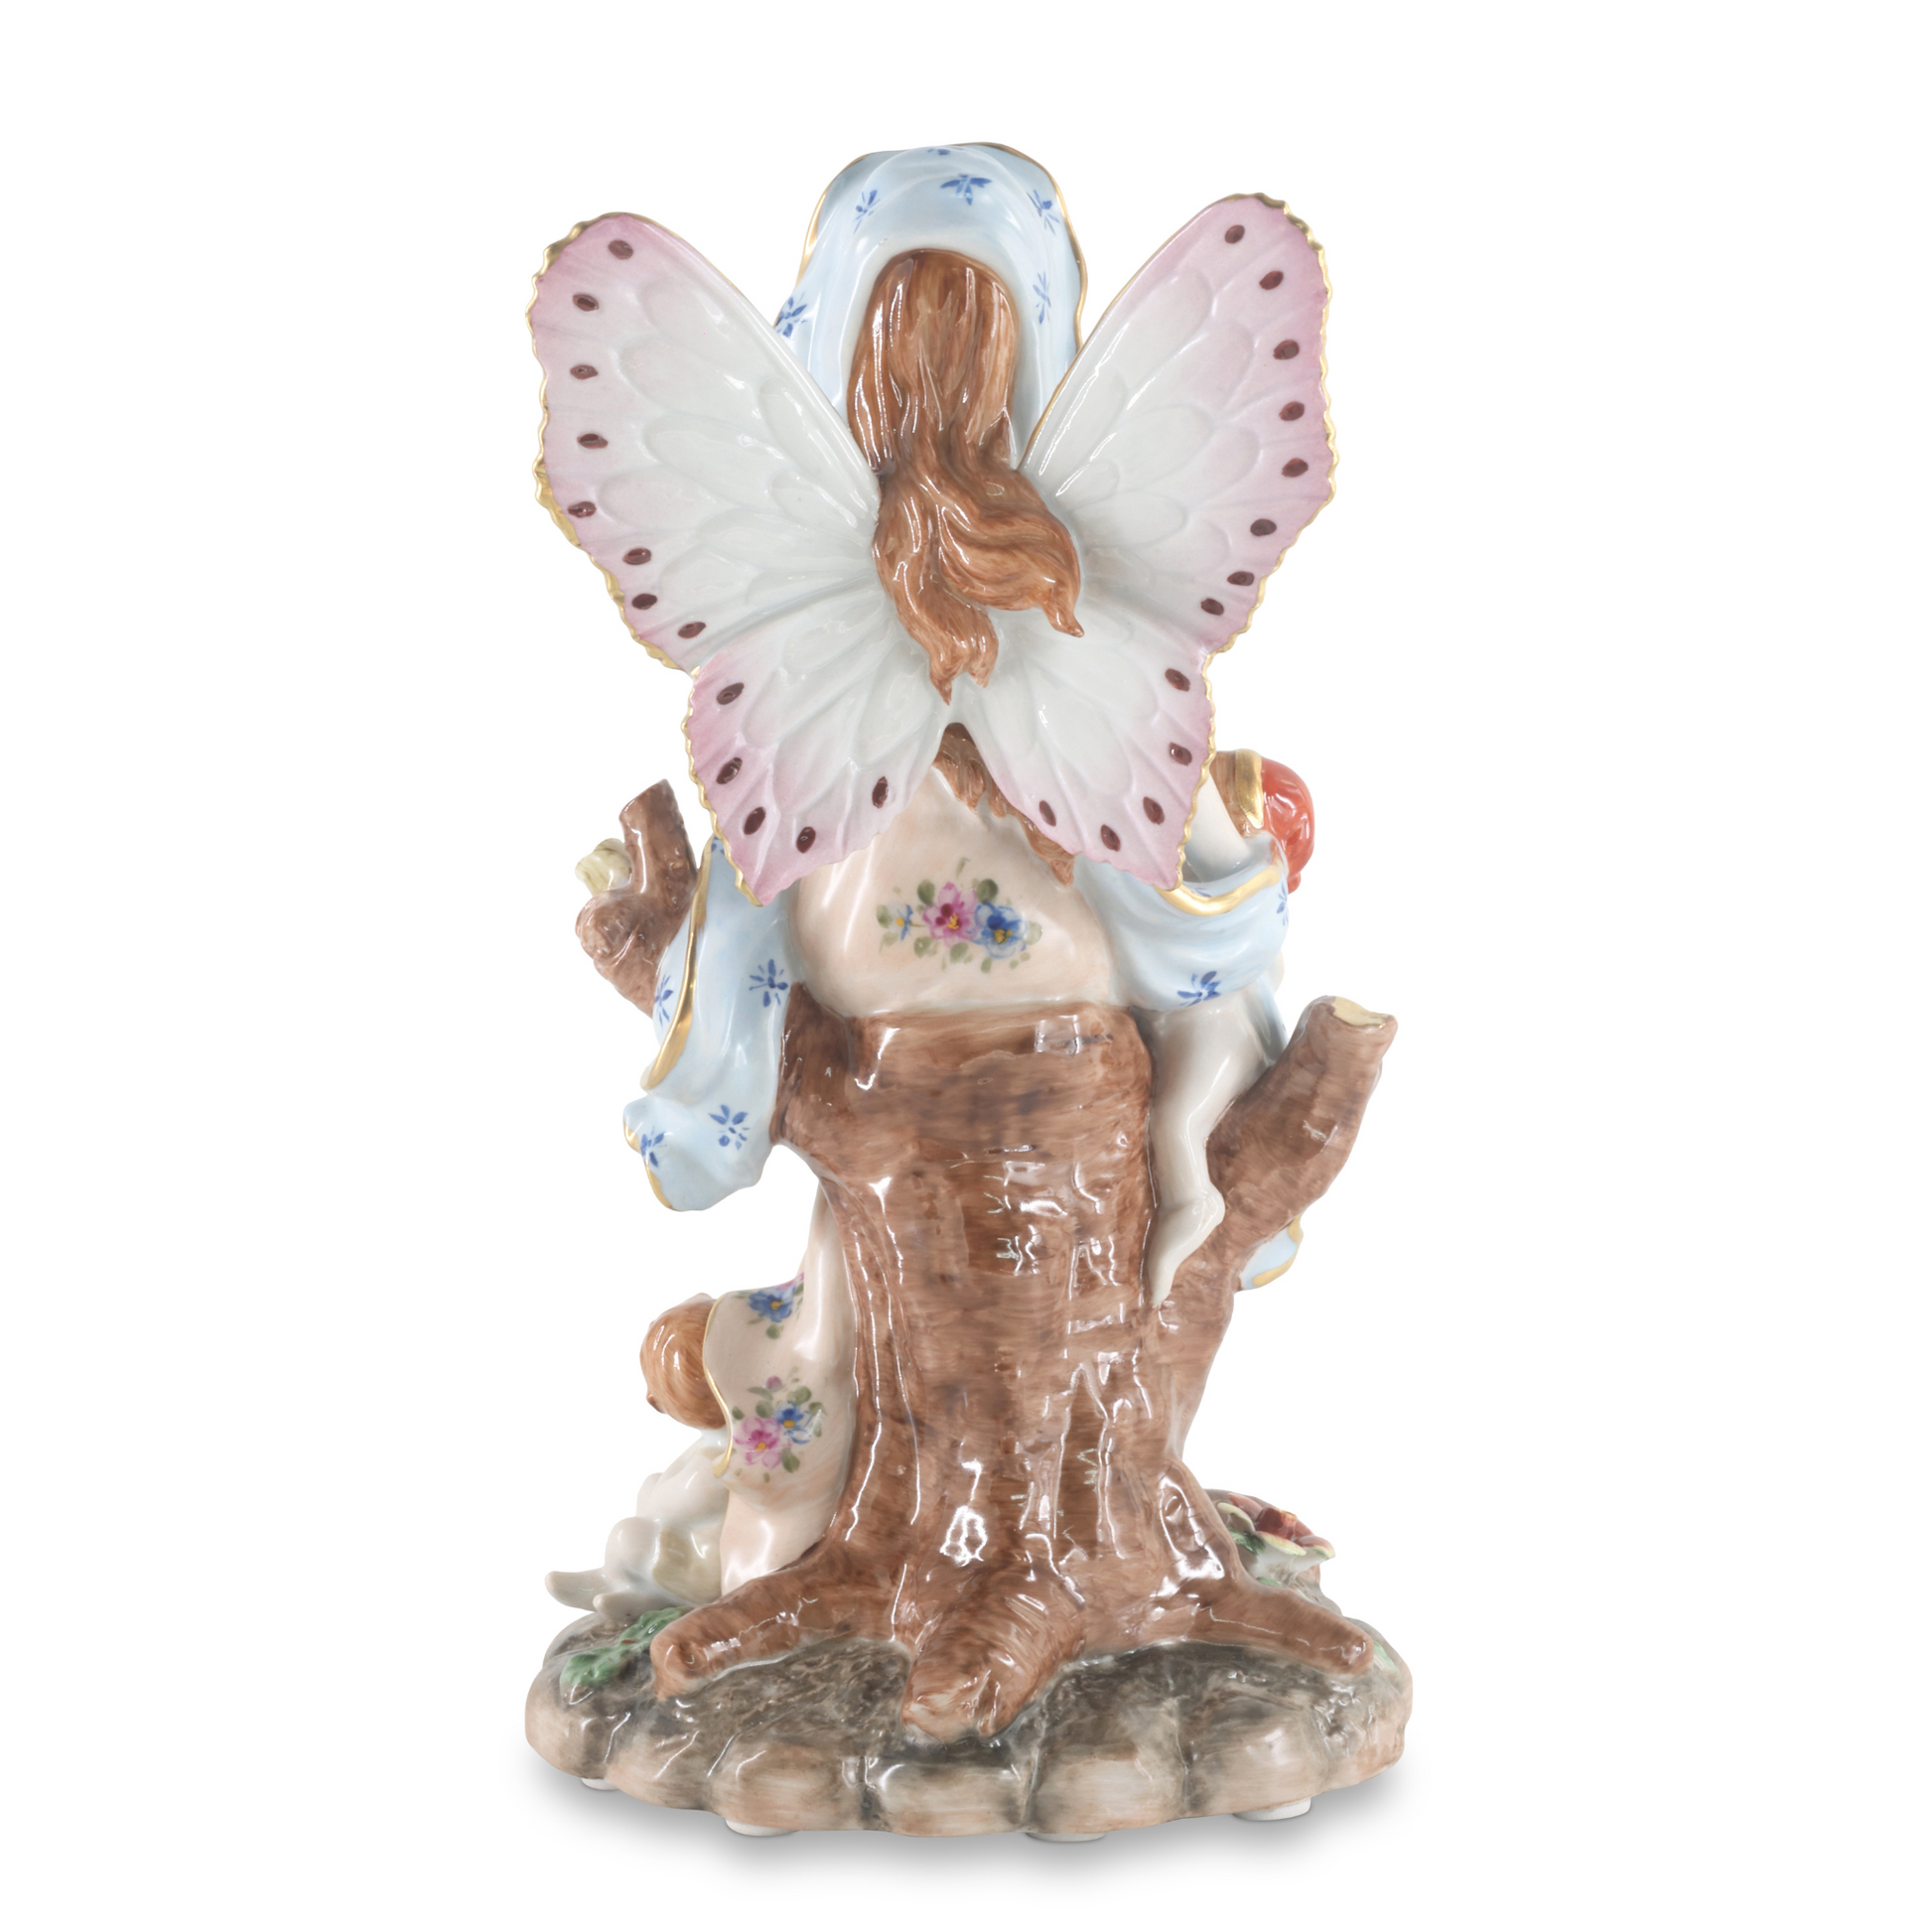 Hand-painted porcelain figurine in Rococo style